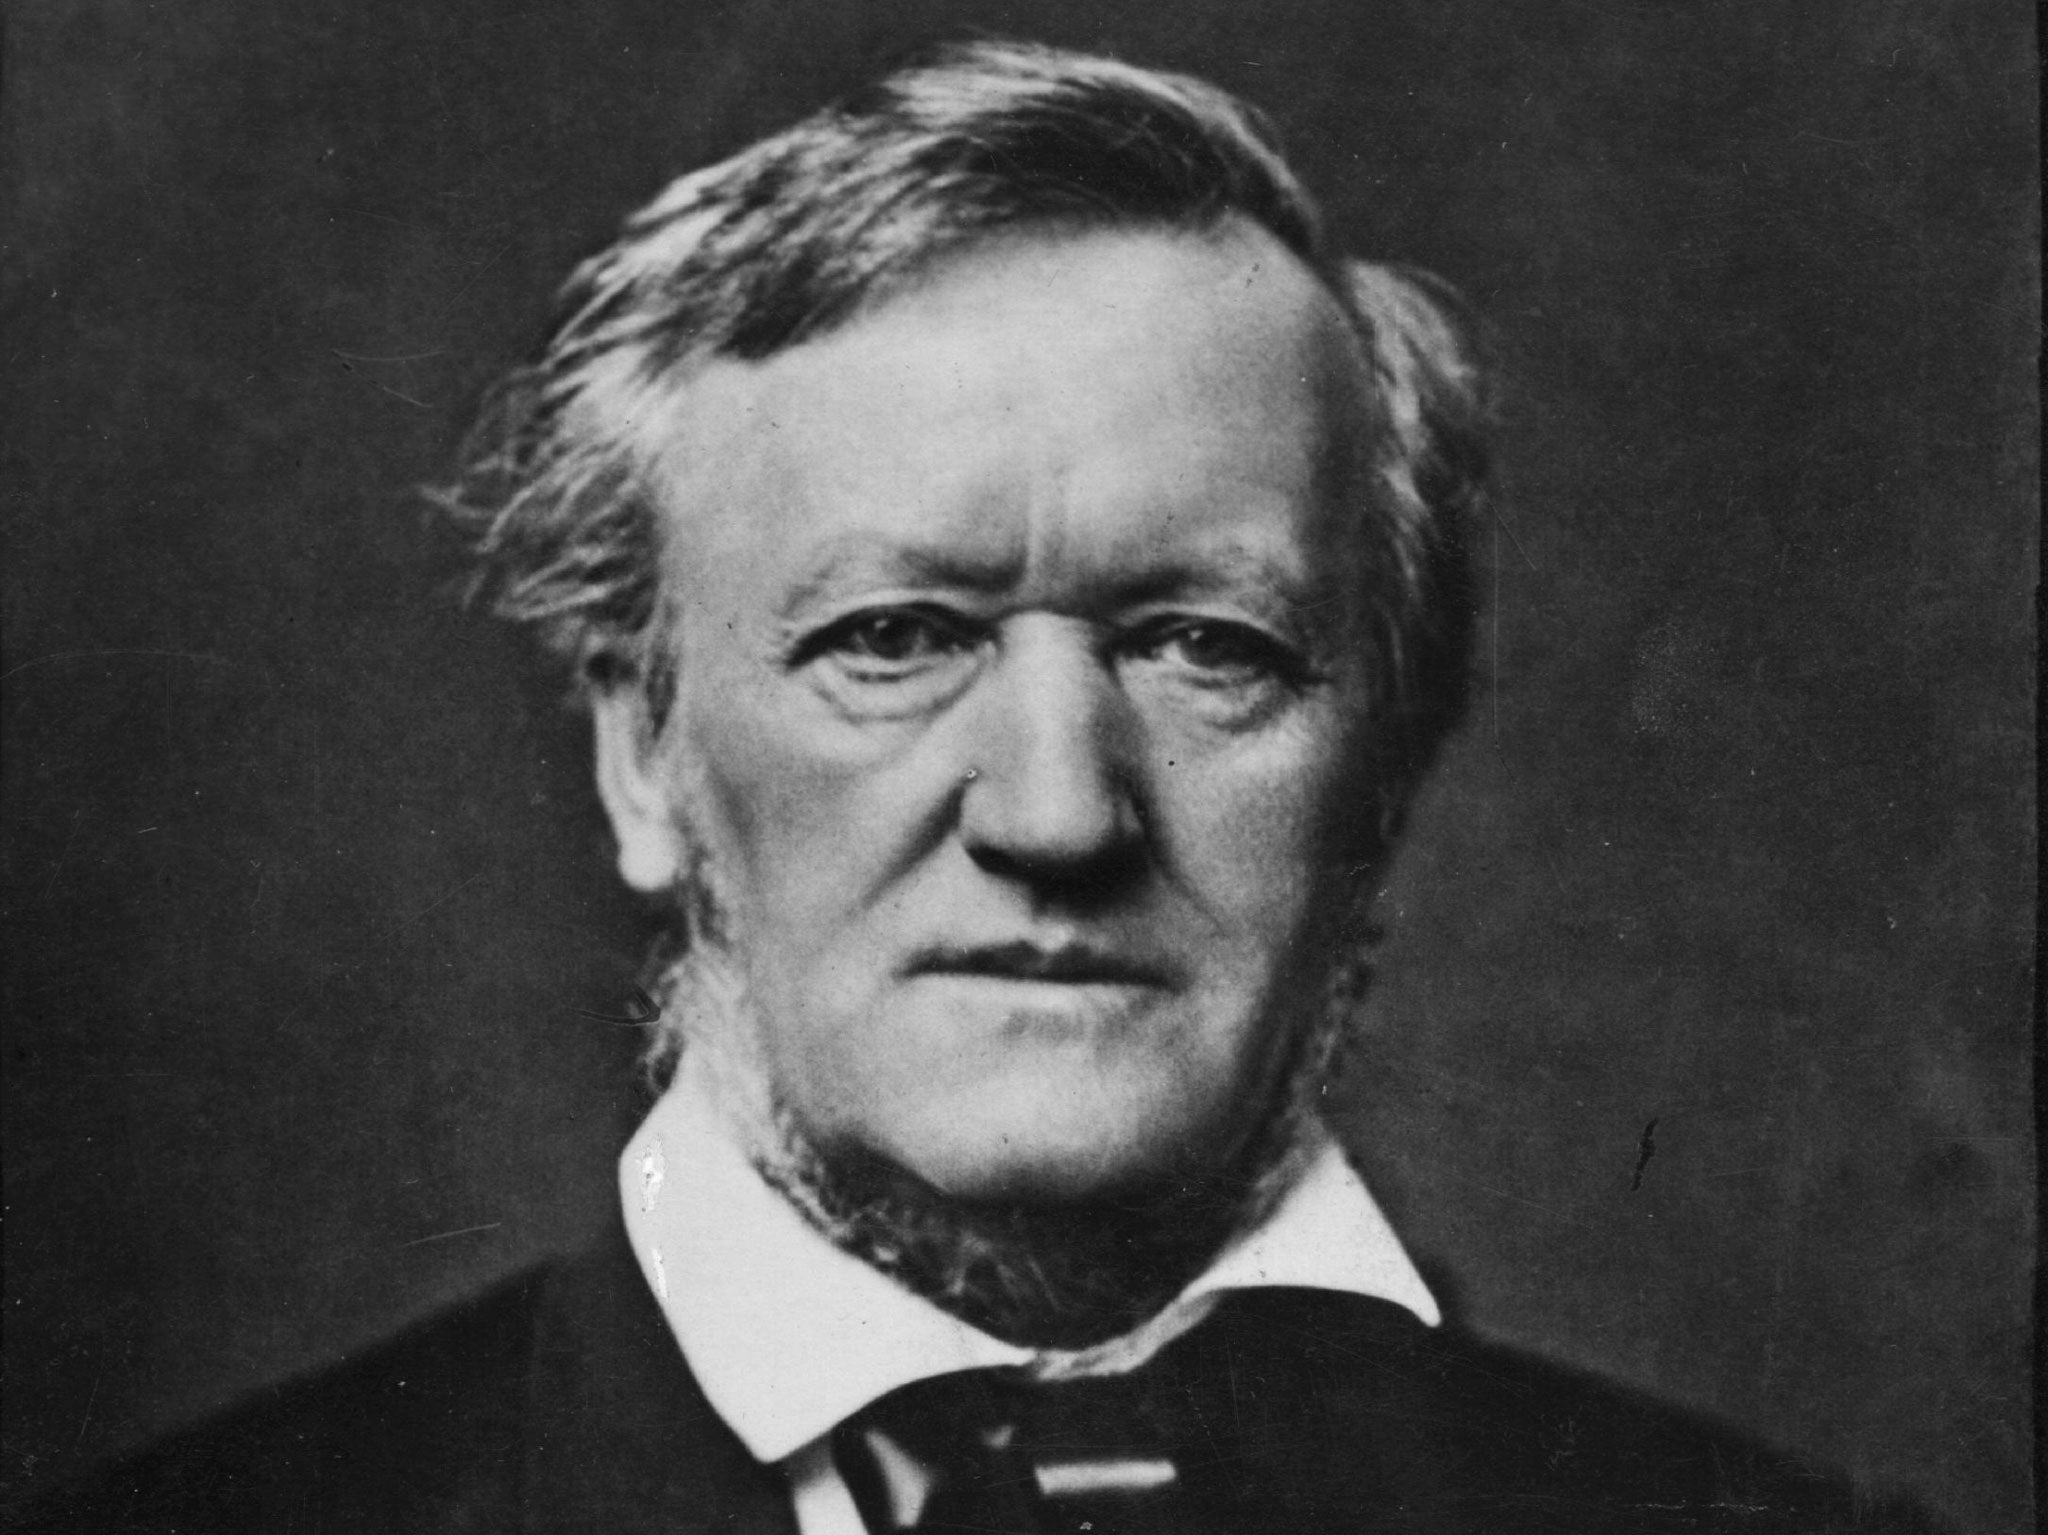 Wilhelm Richard Wagner (1813 - 1883), German composer. His romantic works revolutionized opera, with his use of leitmotif and dramatic power.